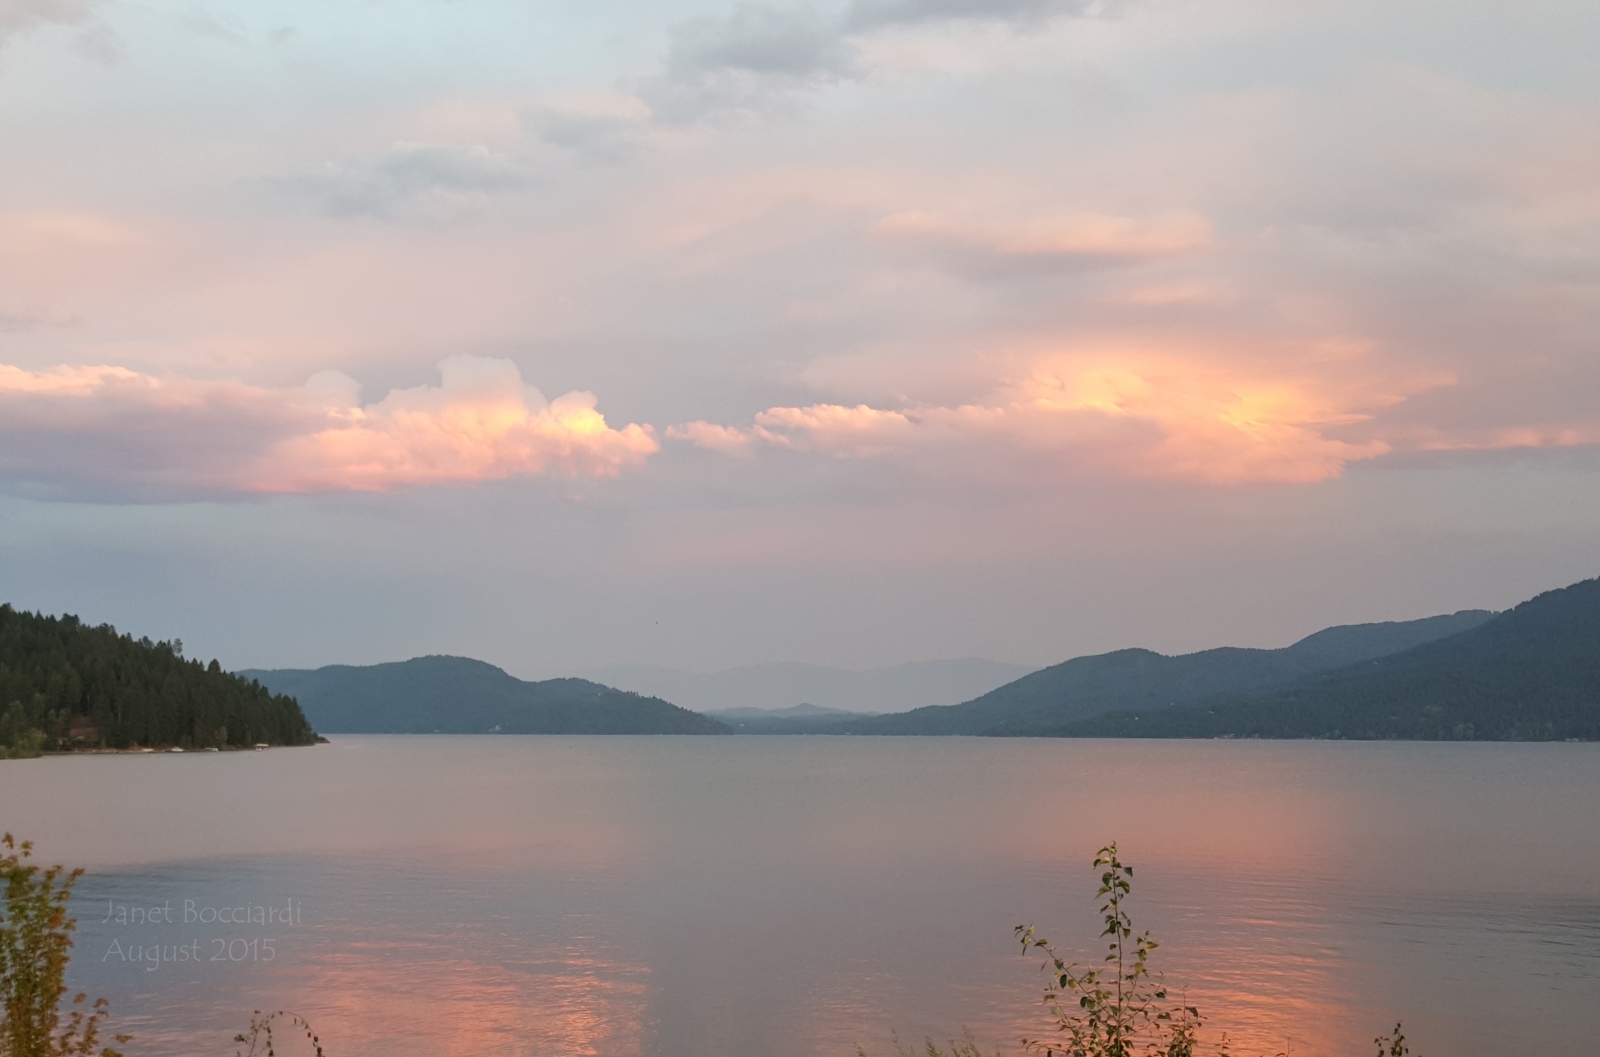 Lake Pend Oreille Sunset August 2015